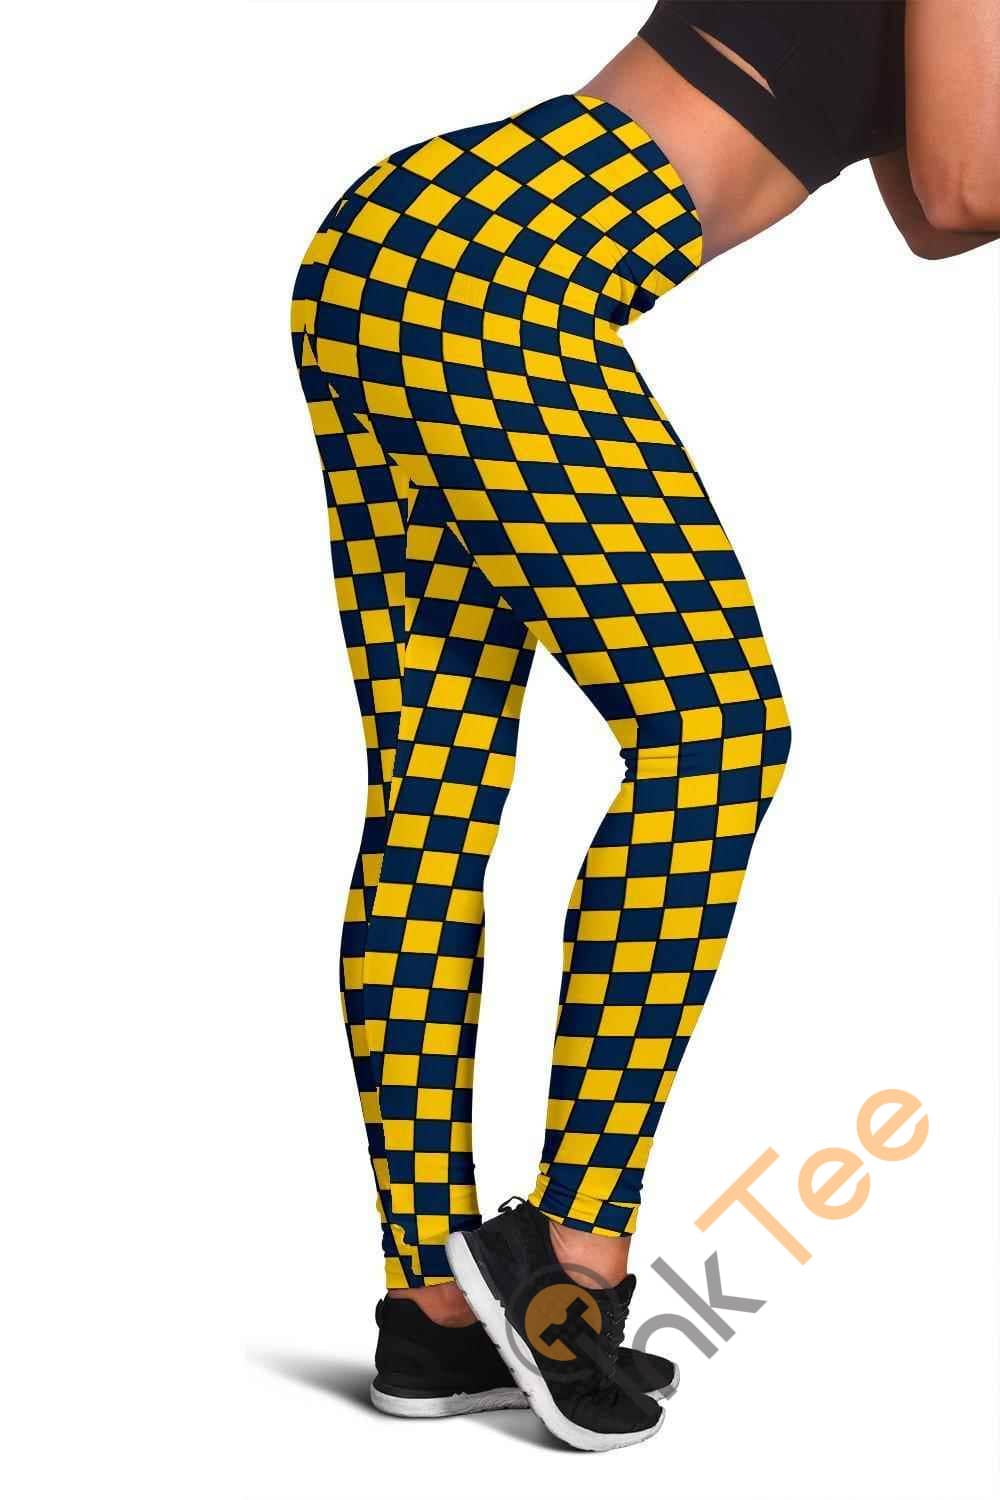 Inktee Store - Michigan Wolverines Fan Inspired 3D All Over Print For Yoga Fitness Checkers Women'S Leggings Image